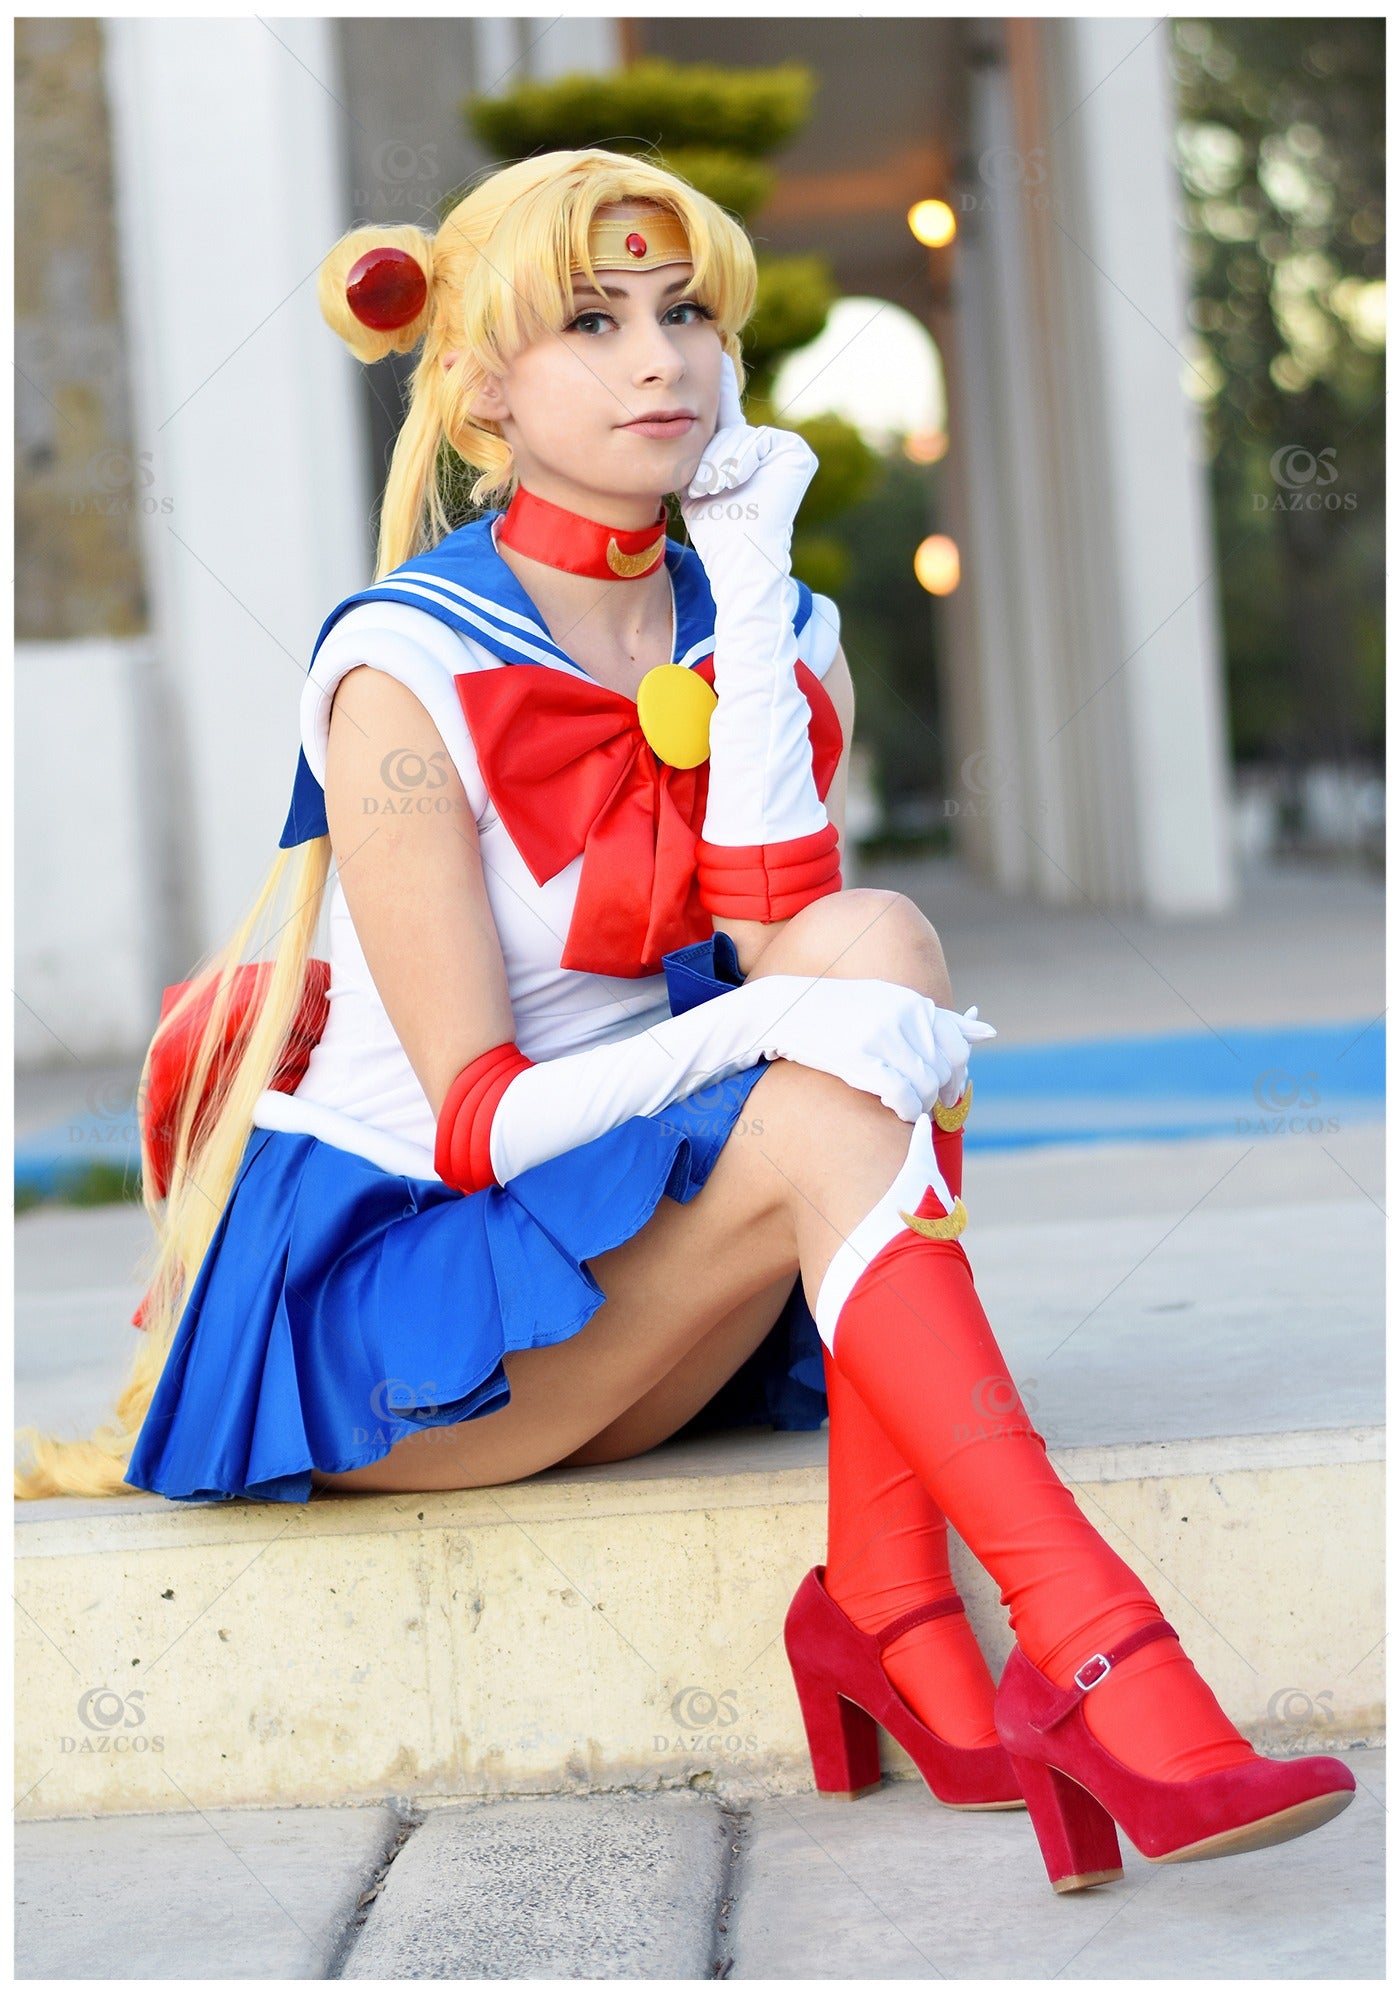  Adult Sailor Moon Costume Women's Sailor Moon Costume Large :  Clothing, Shoes & Jewelry